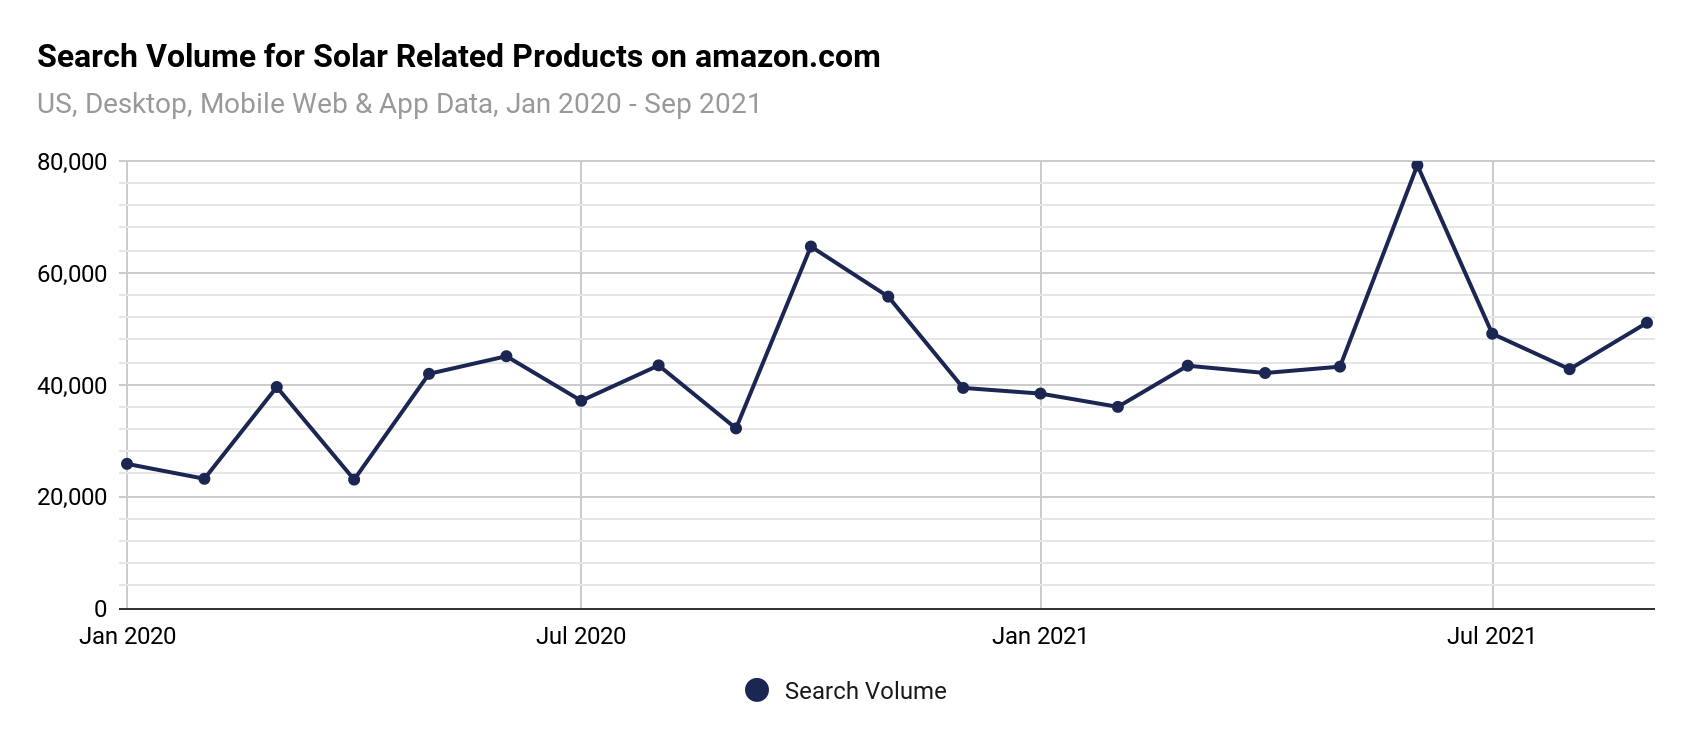 Volume for solar related products on amazon.com